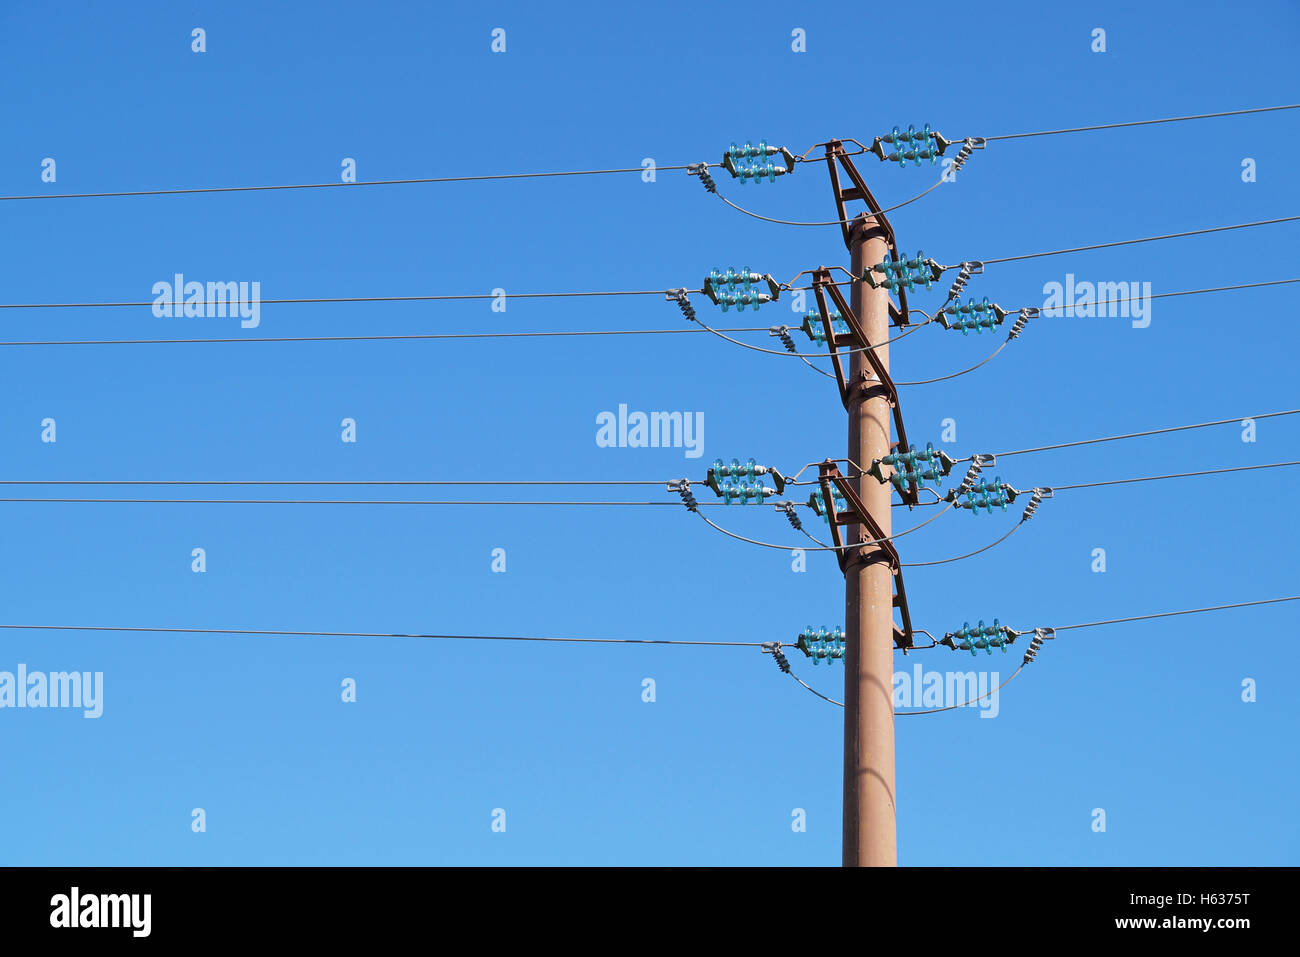 pole, electric, light, electrical, poles, against, power, voltage, transformer, blue, line, industrial, danger, electricity, cab Stock Photo